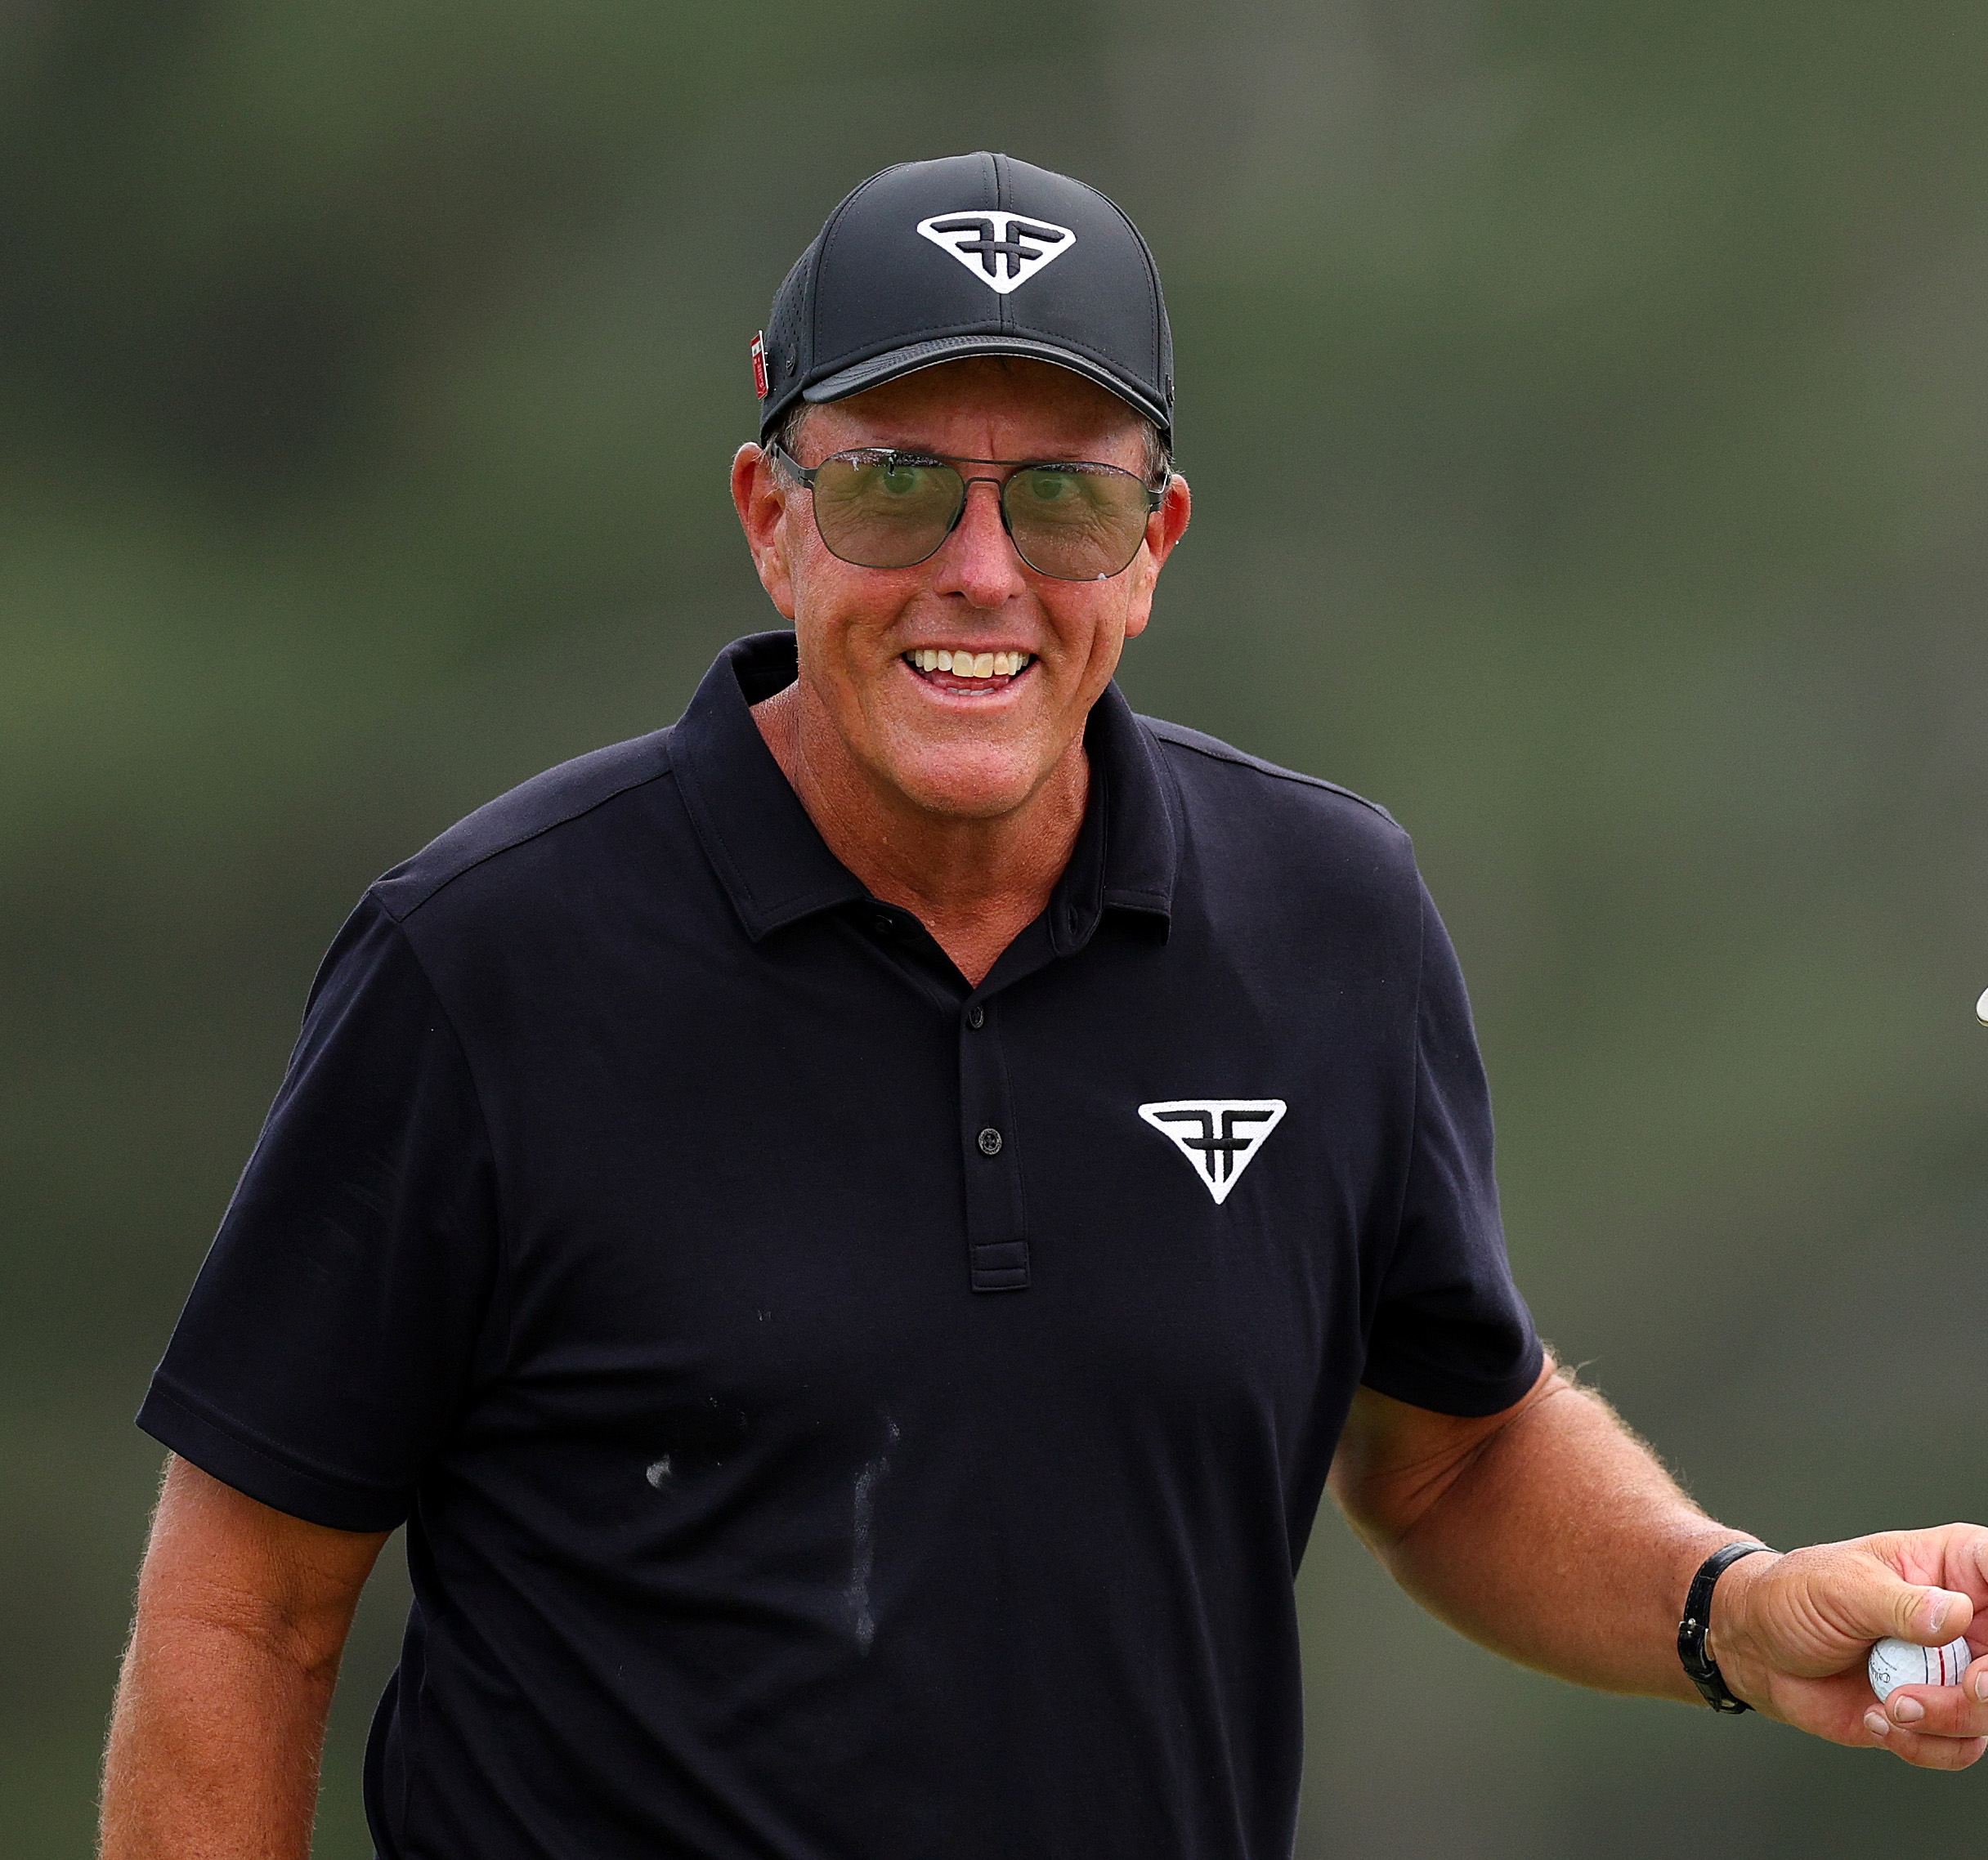 Phil Mickelson won one for old guys everywhere, even if we couldn